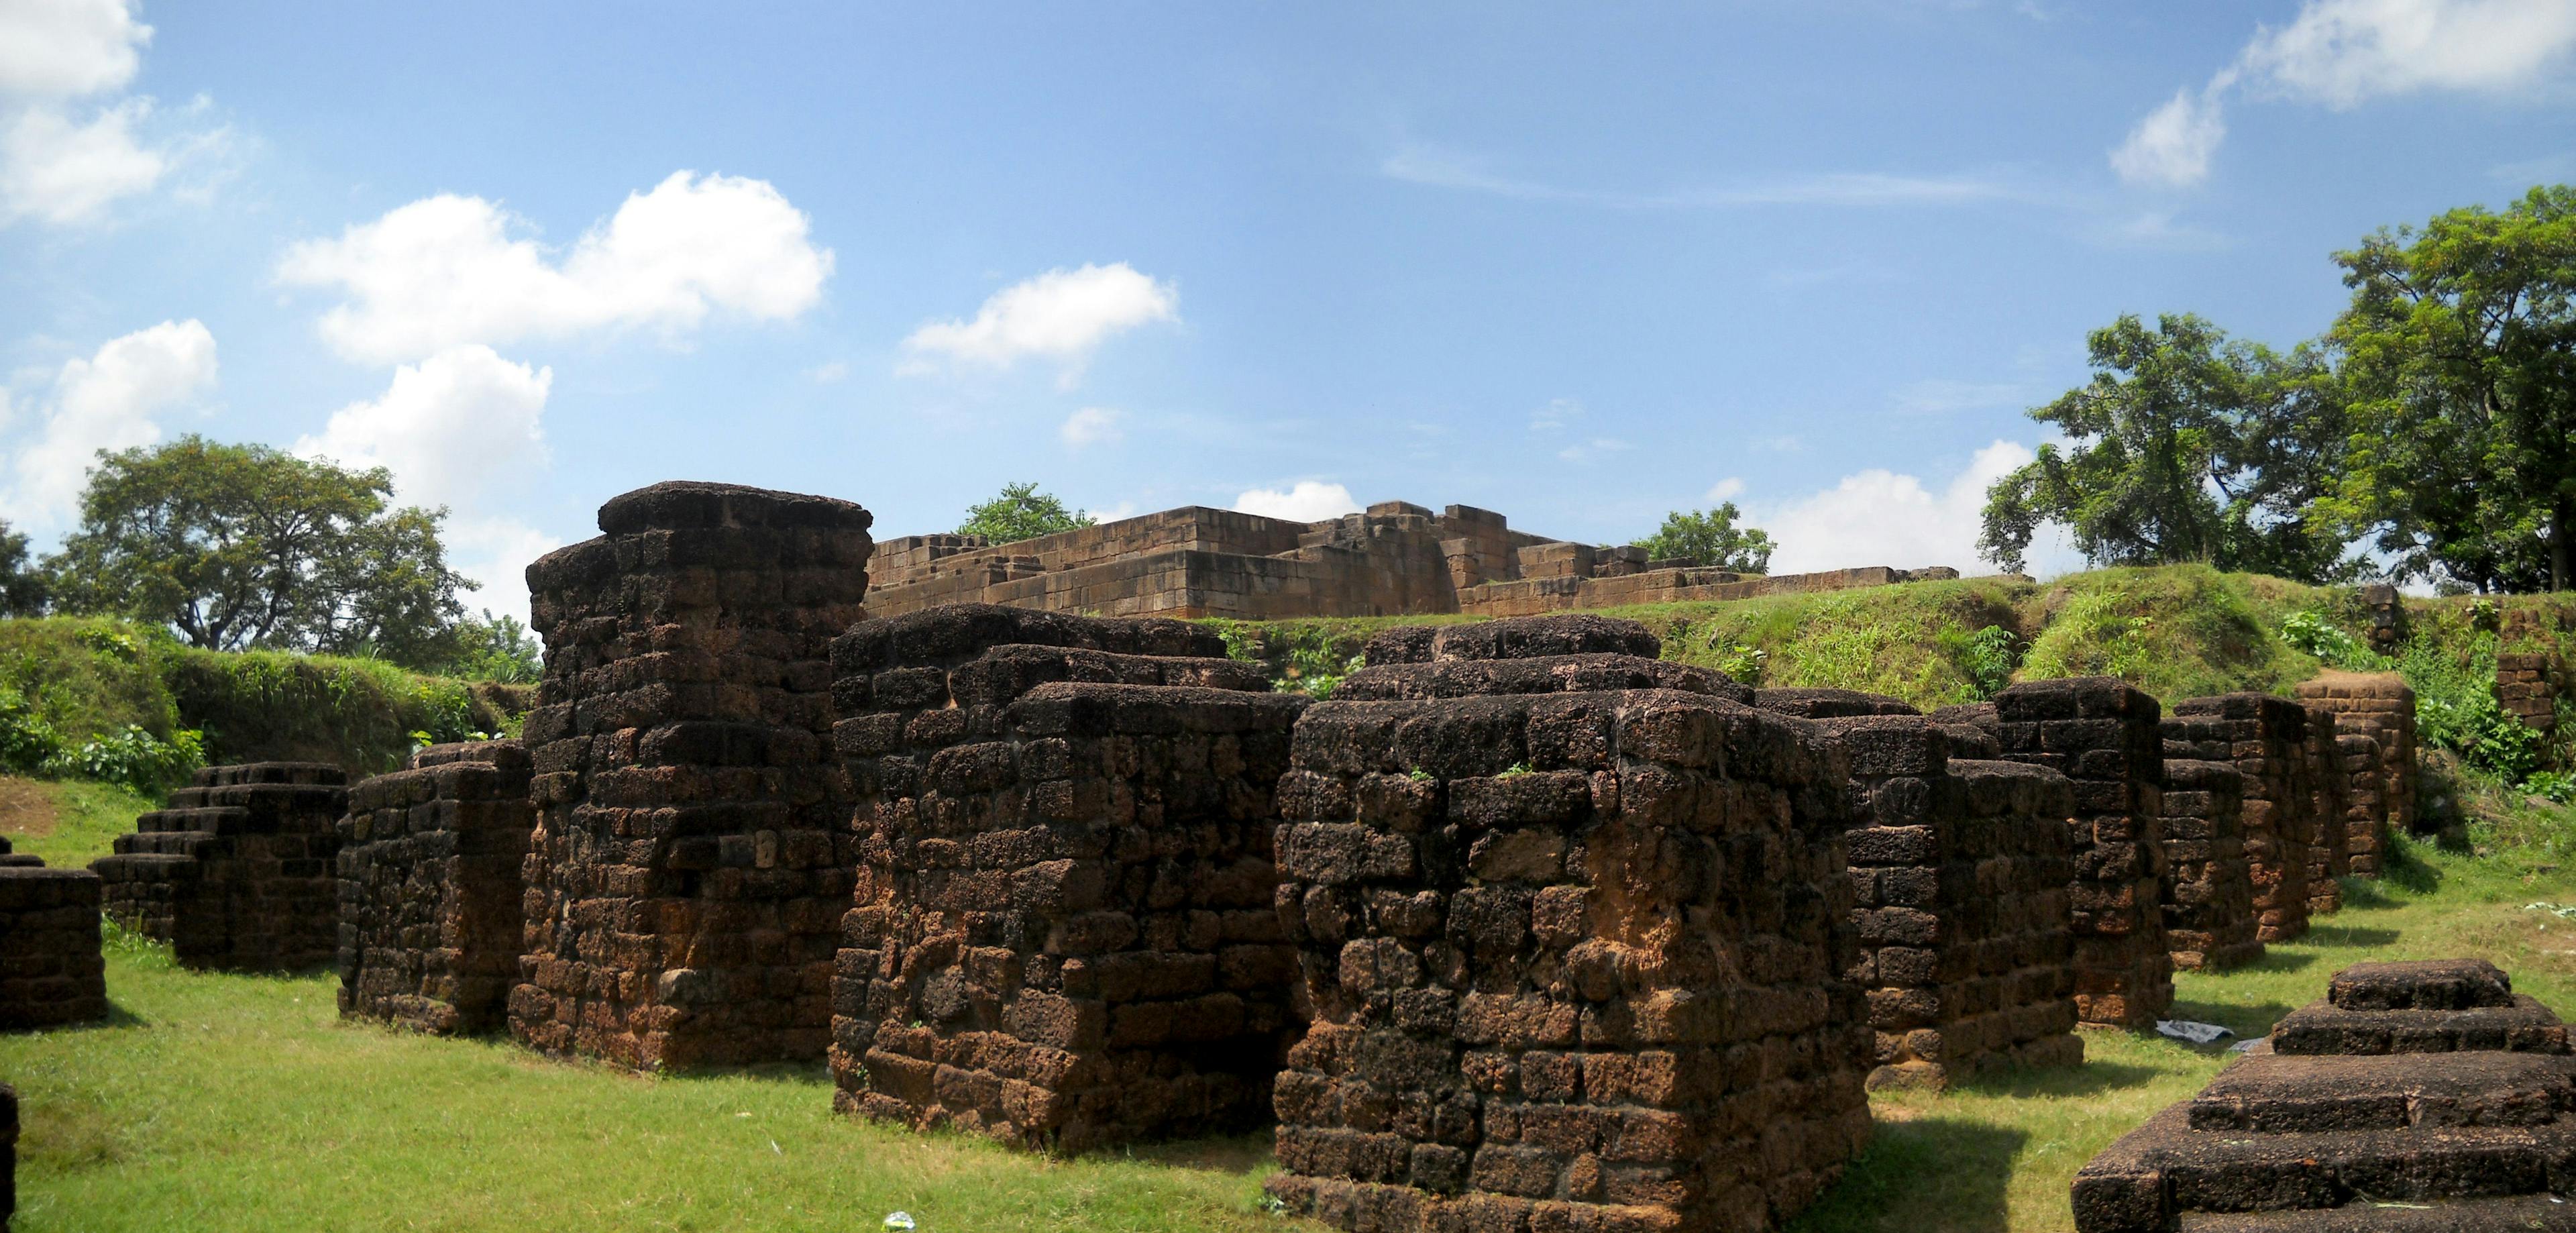 Barabati Fort- Bastions and ramparts of the fort